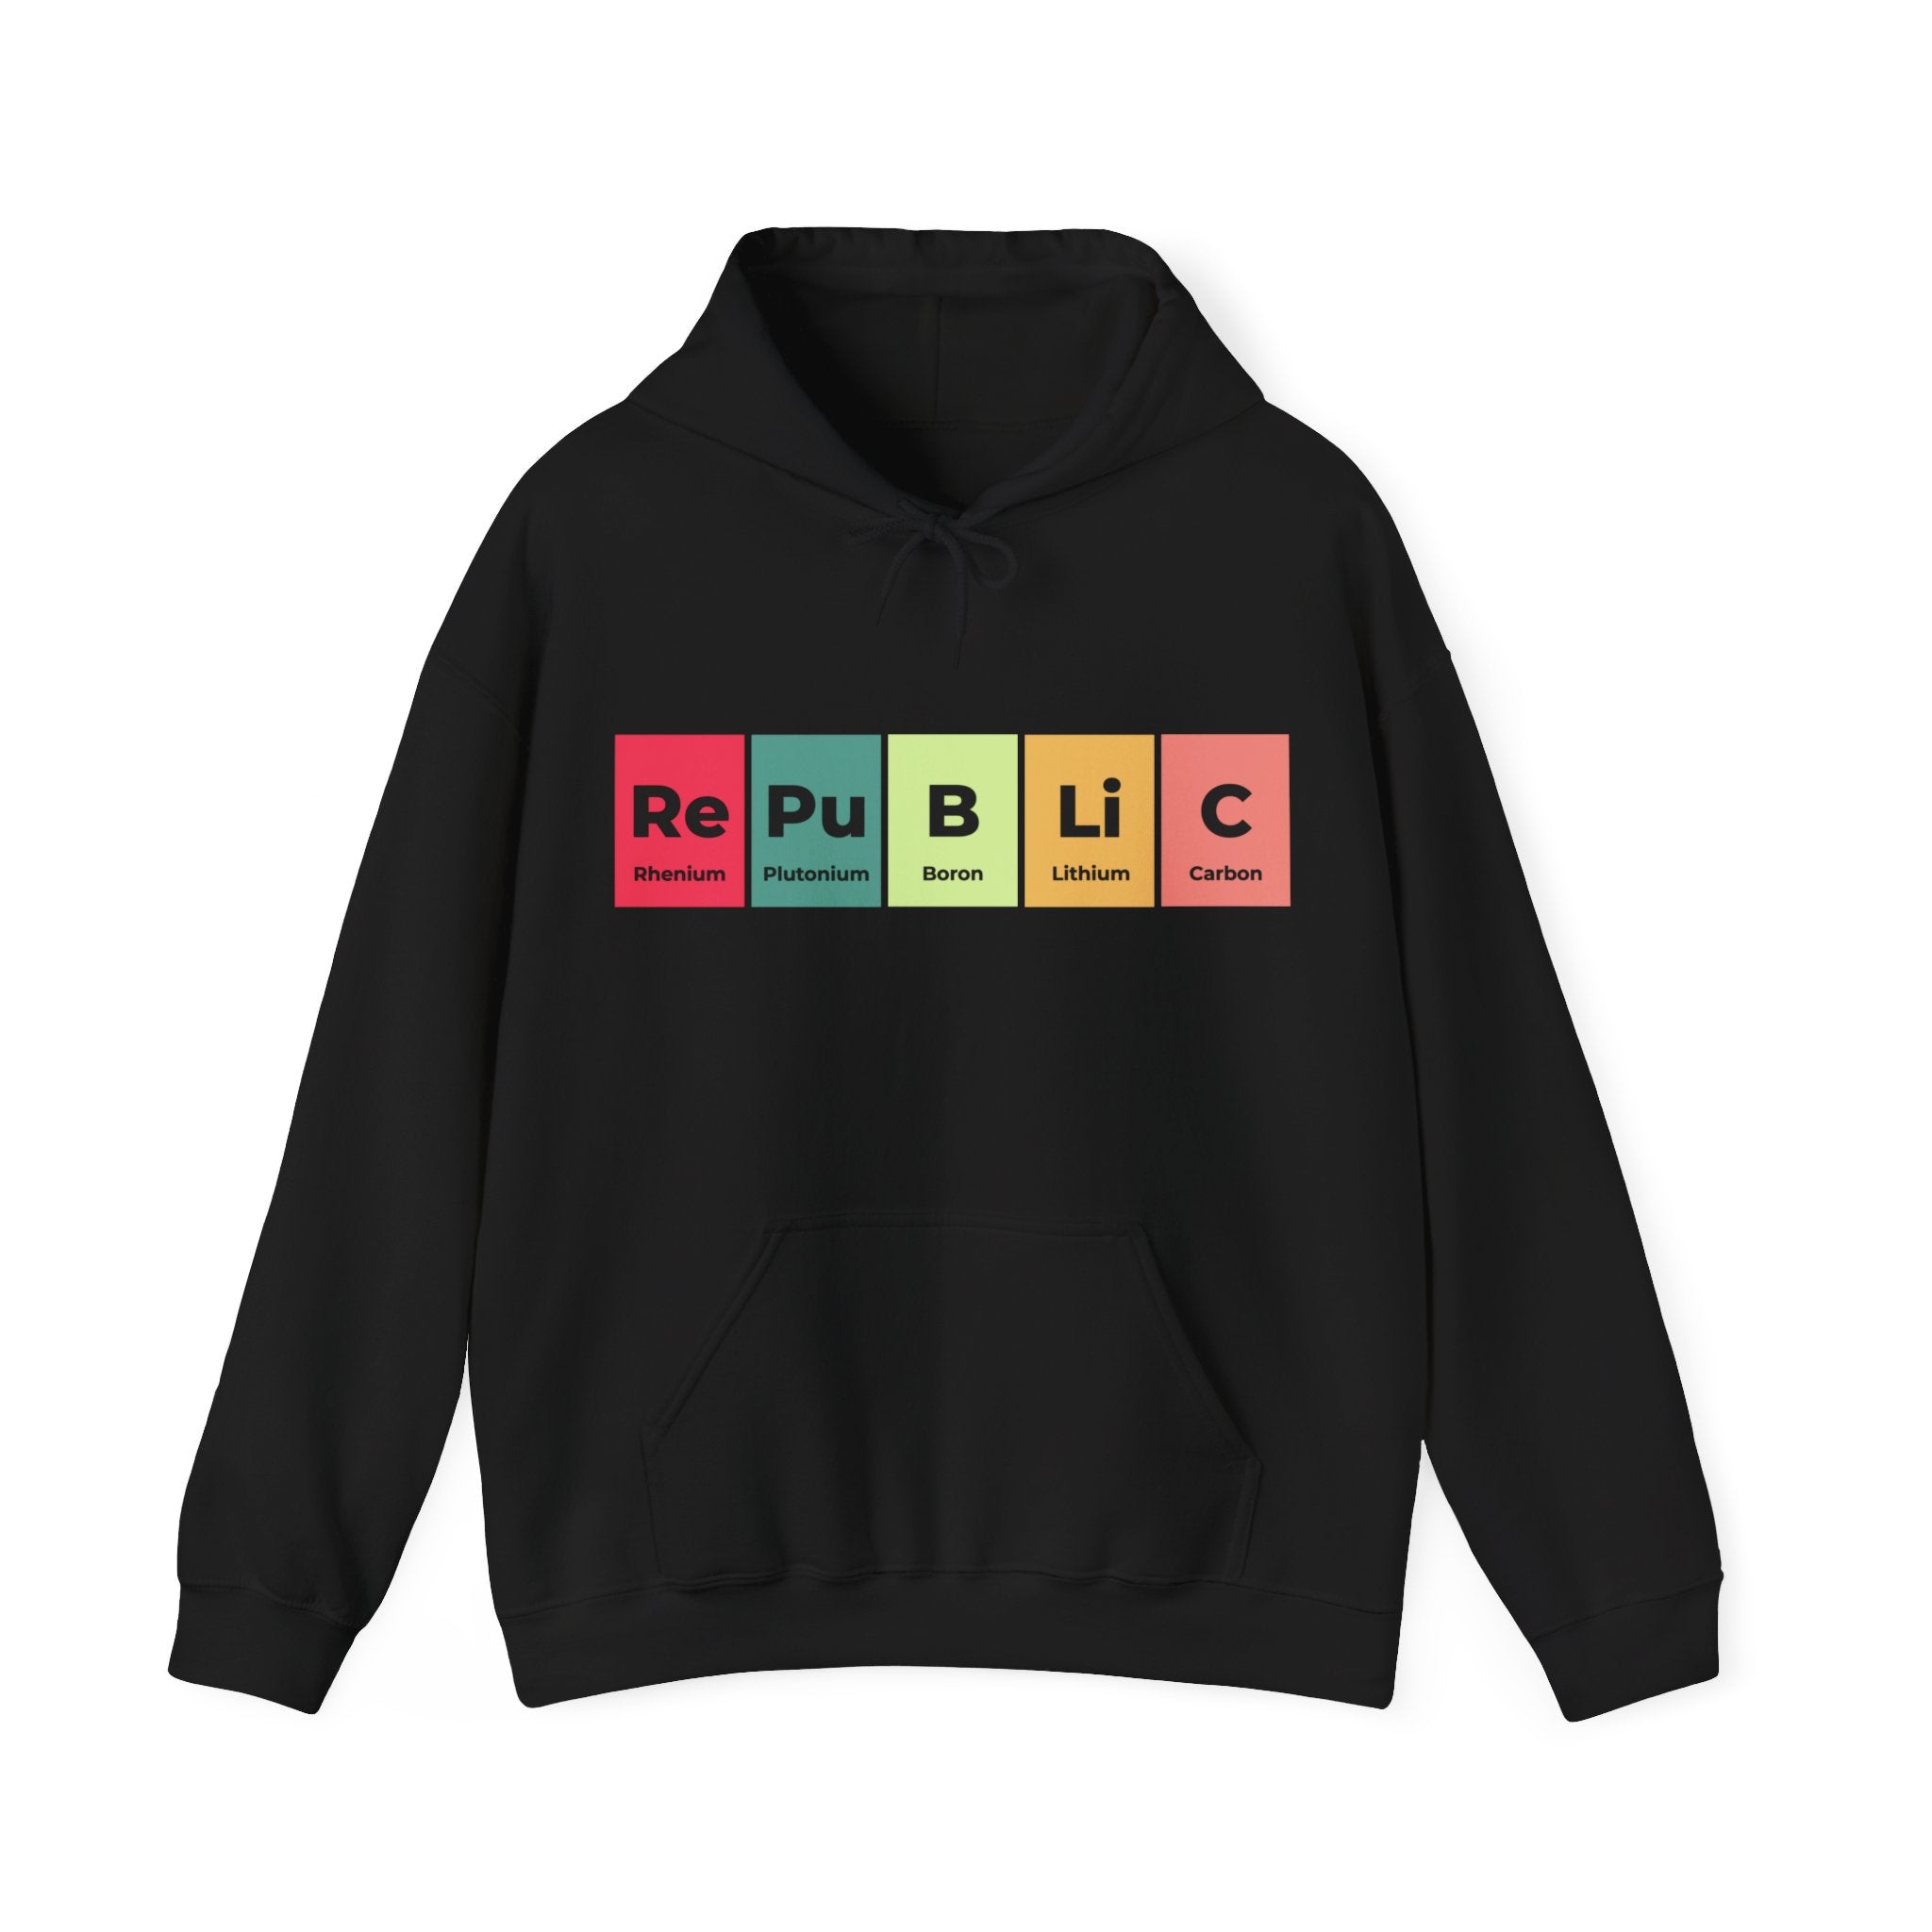 Republic - Hooded Sweatshirt: Black hooded sweatshirt with the word "RePuBLiC" written using elements from the periodic table: Rhenium, Plutonium, Boron, Lithium, and Carbon, each in a colorful block. Show off your patriotic pride with this unique Republic design.